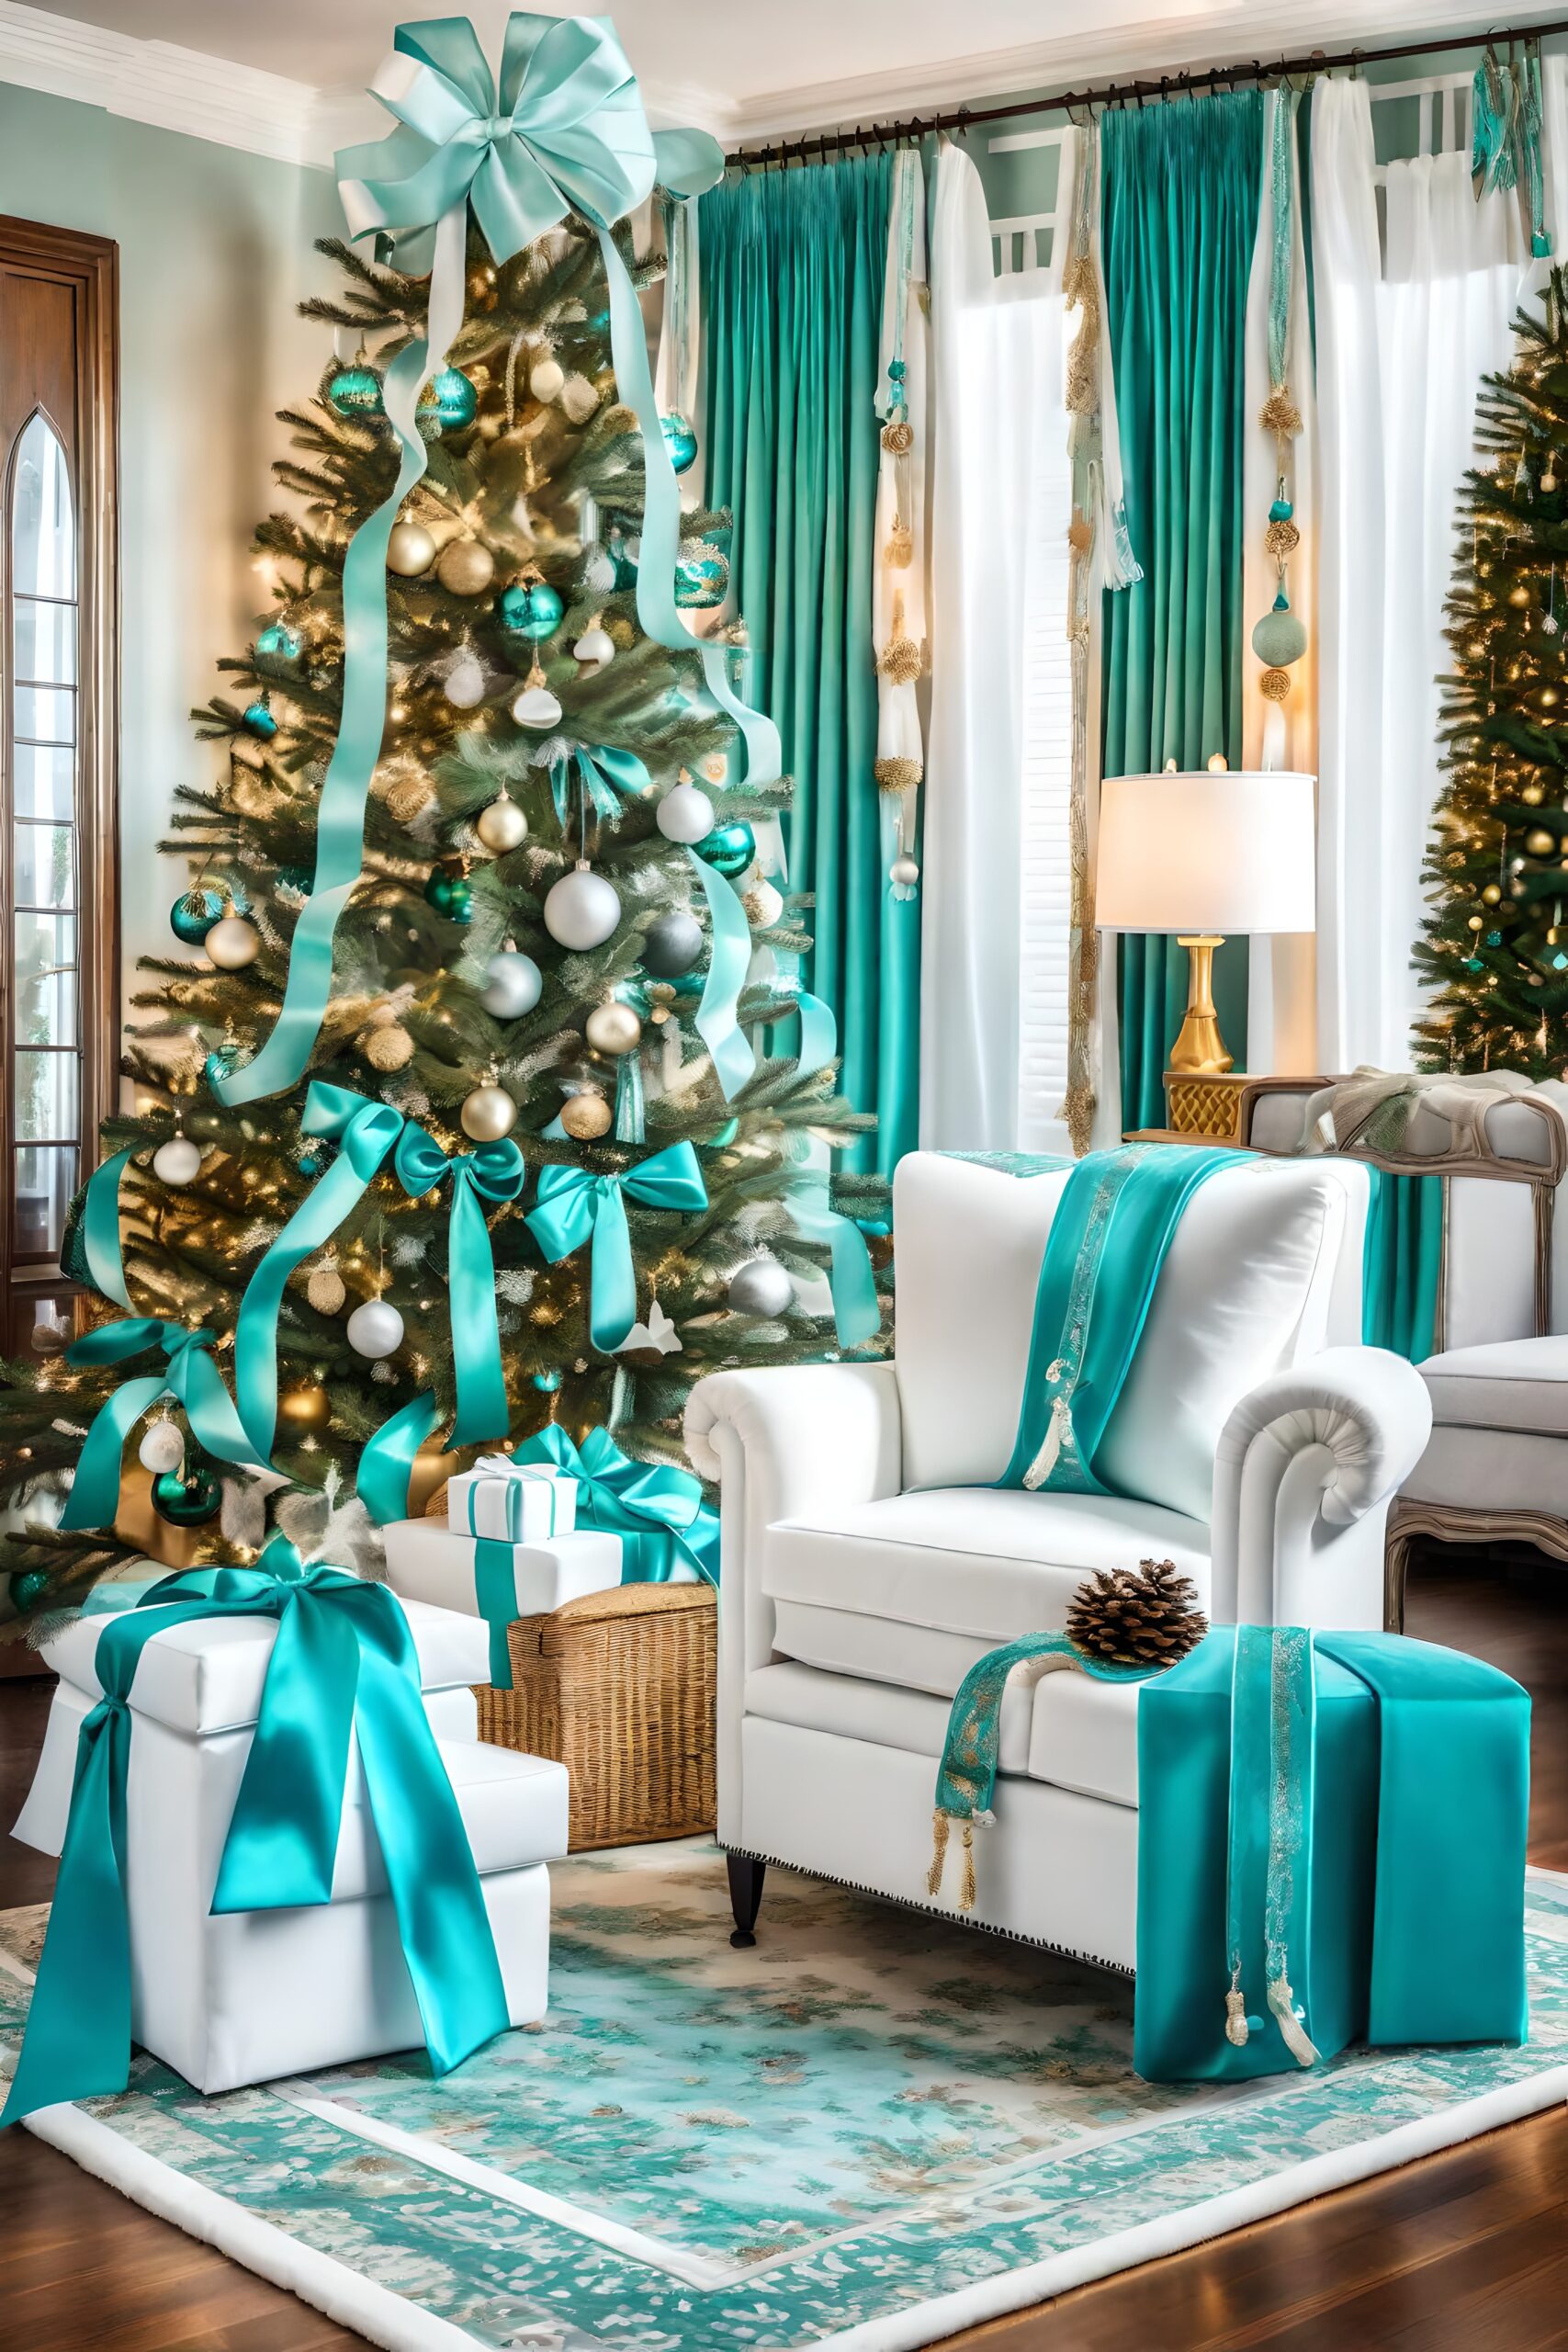 Stunning Tiffany Blue Decor for an
Elegant Touch